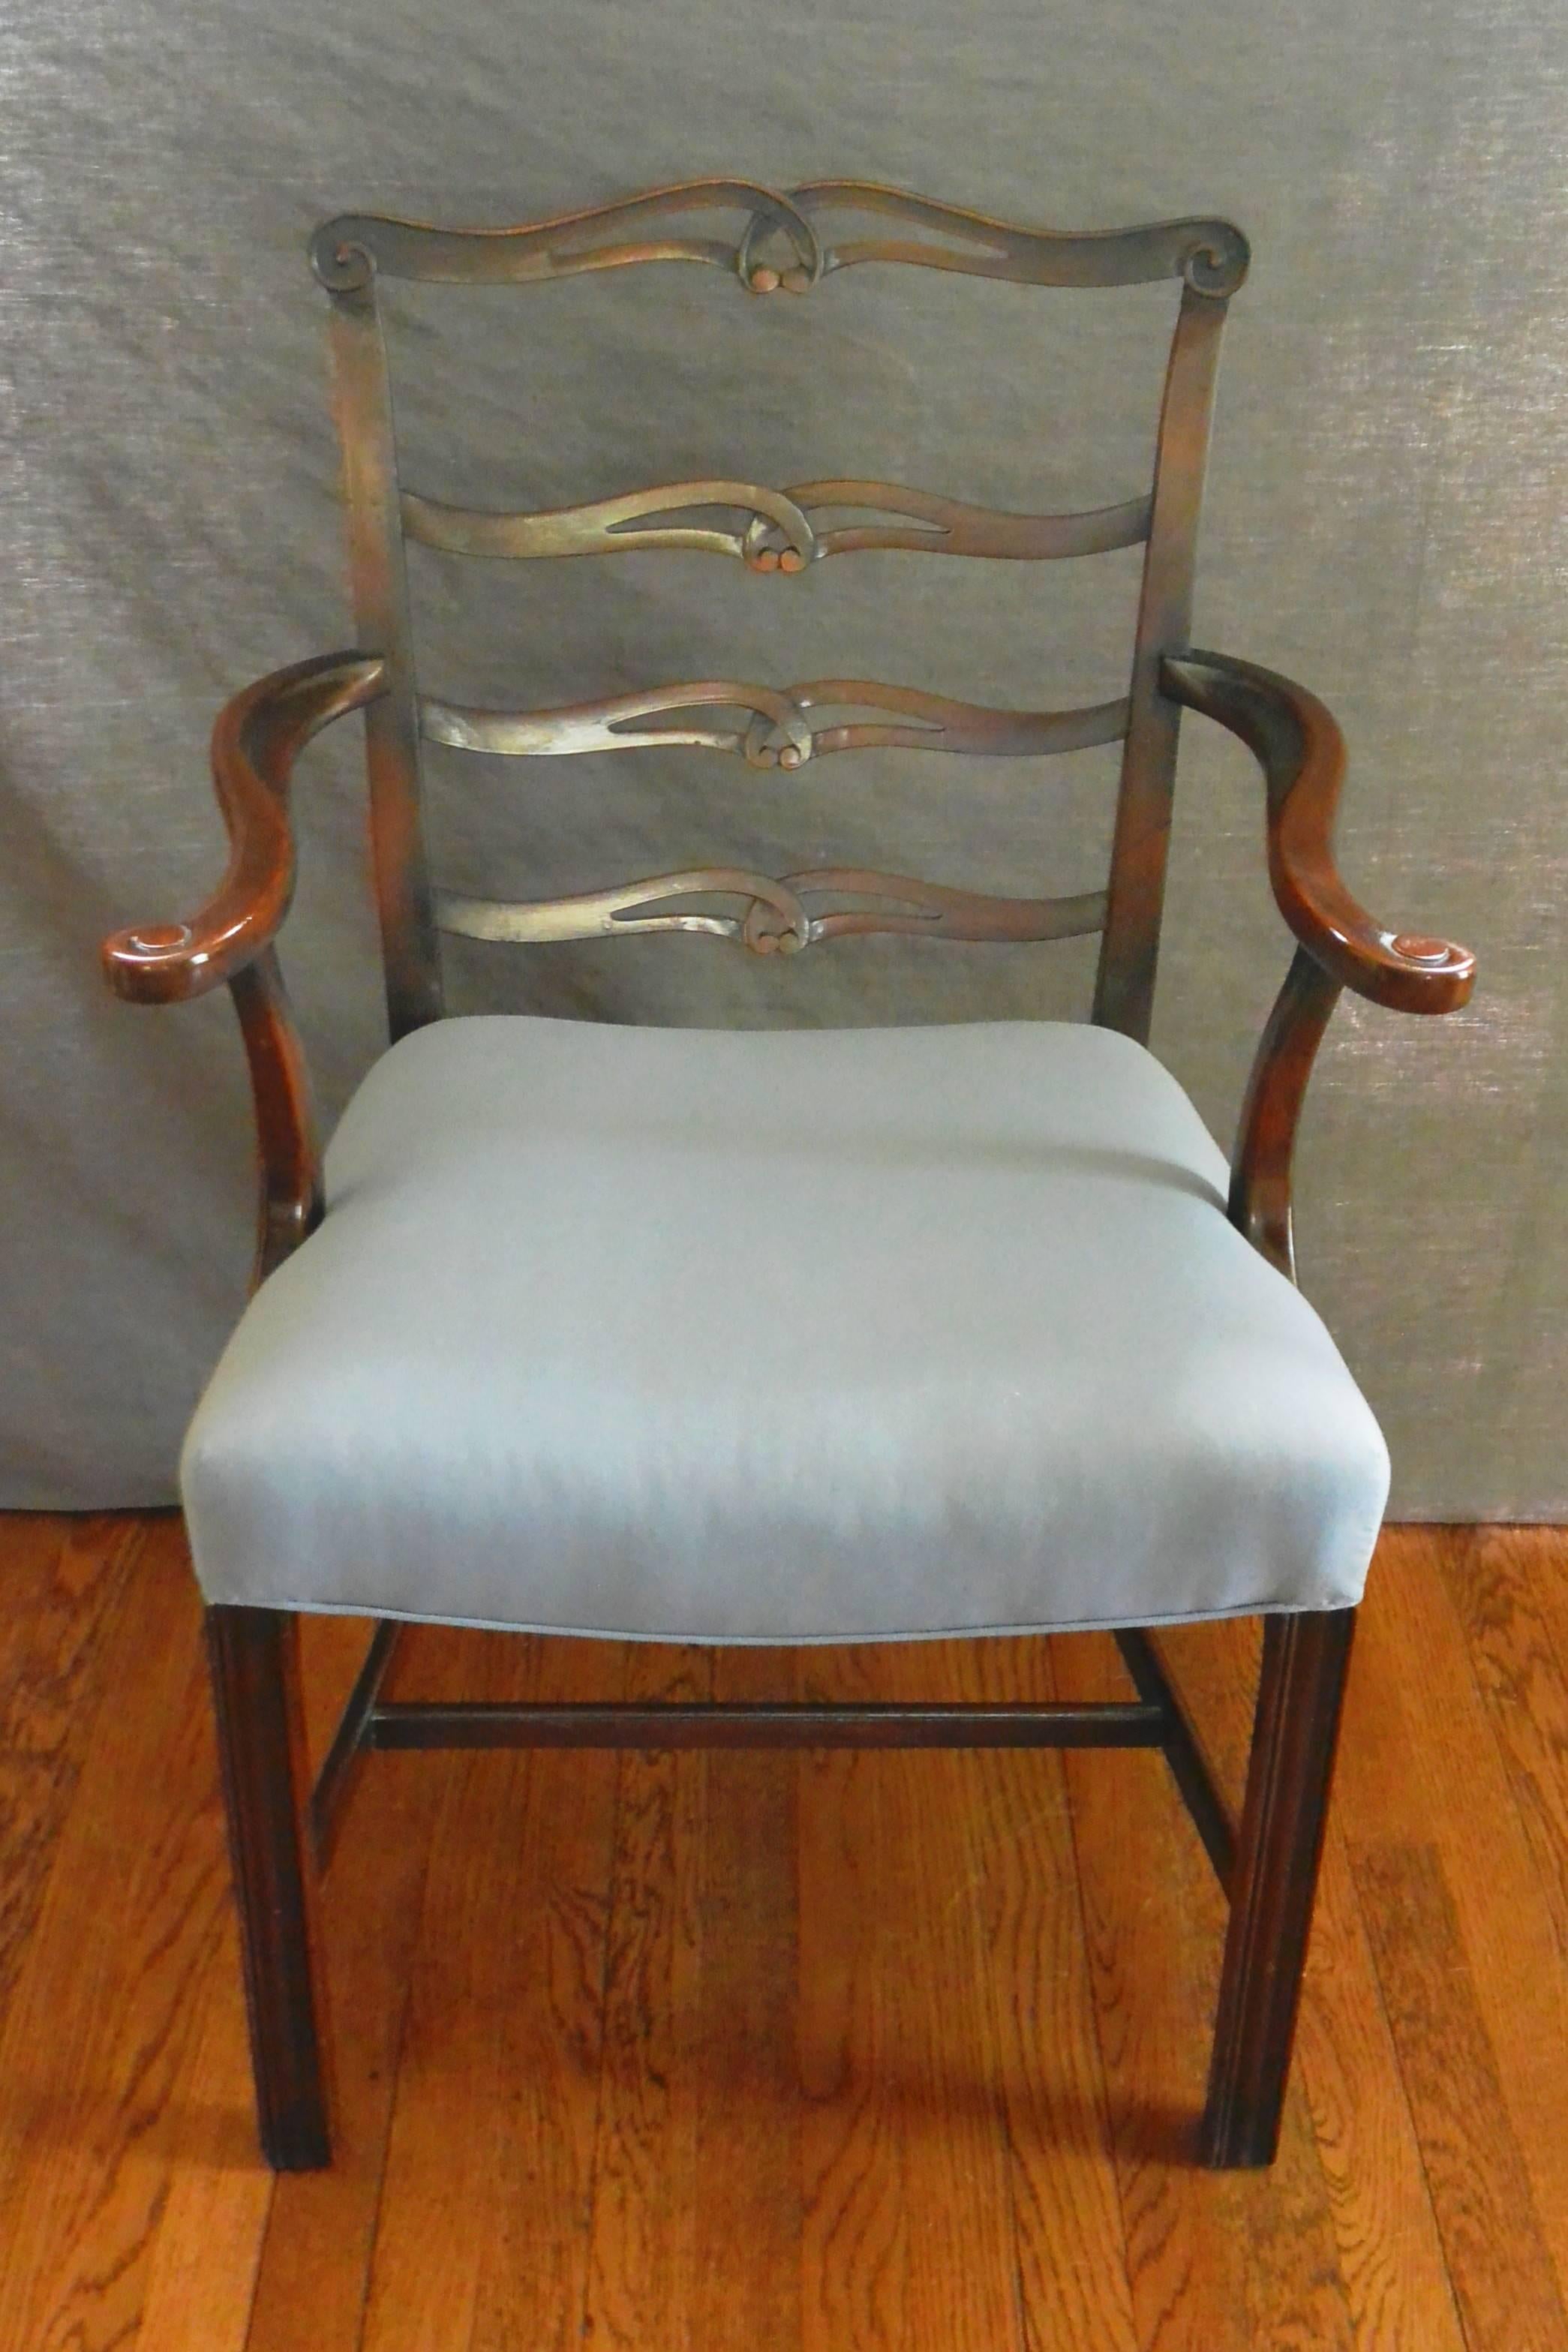 George III style ladderback armchair.  Chippendale form mahogany armchair with four shaped and pierced splats and moulded front legs below newly upholstered seat.  England, early 19th century.   
Dimensions:  27" W x 21" D x 36.25"H;